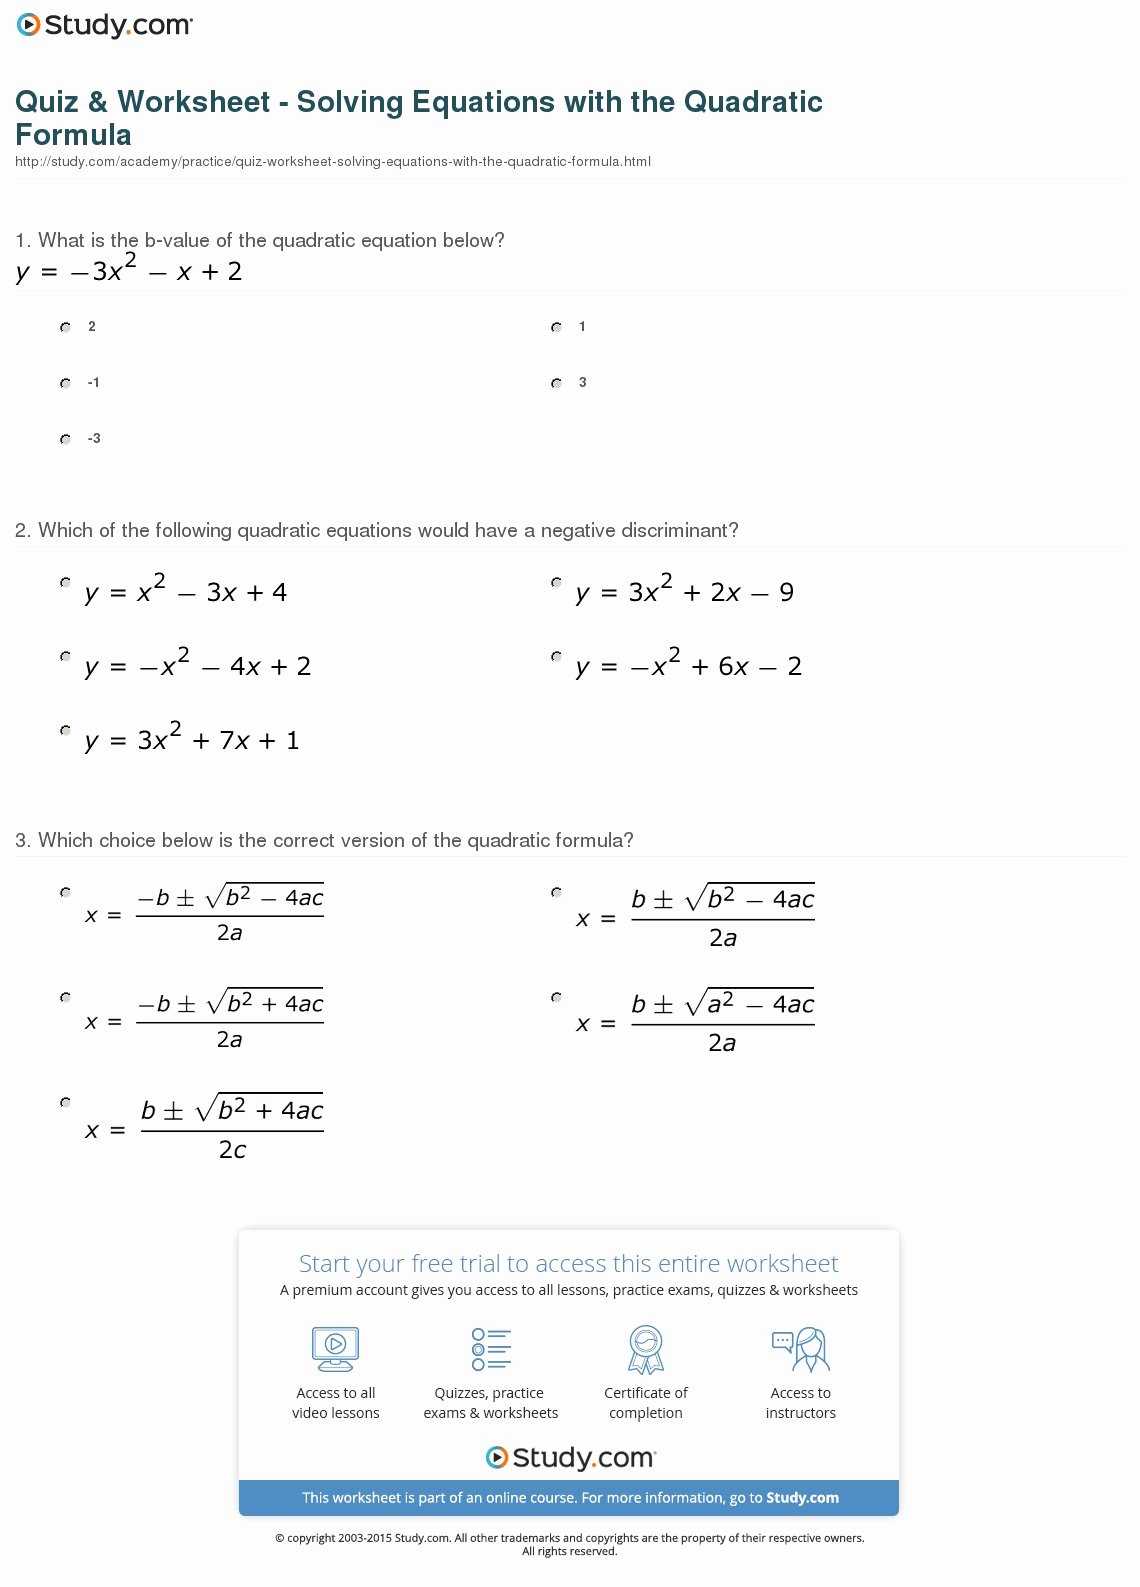 Quadratic Equation Worksheet with Answers Awesome Quiz &amp; Worksheet solving Equations with the Quadratic